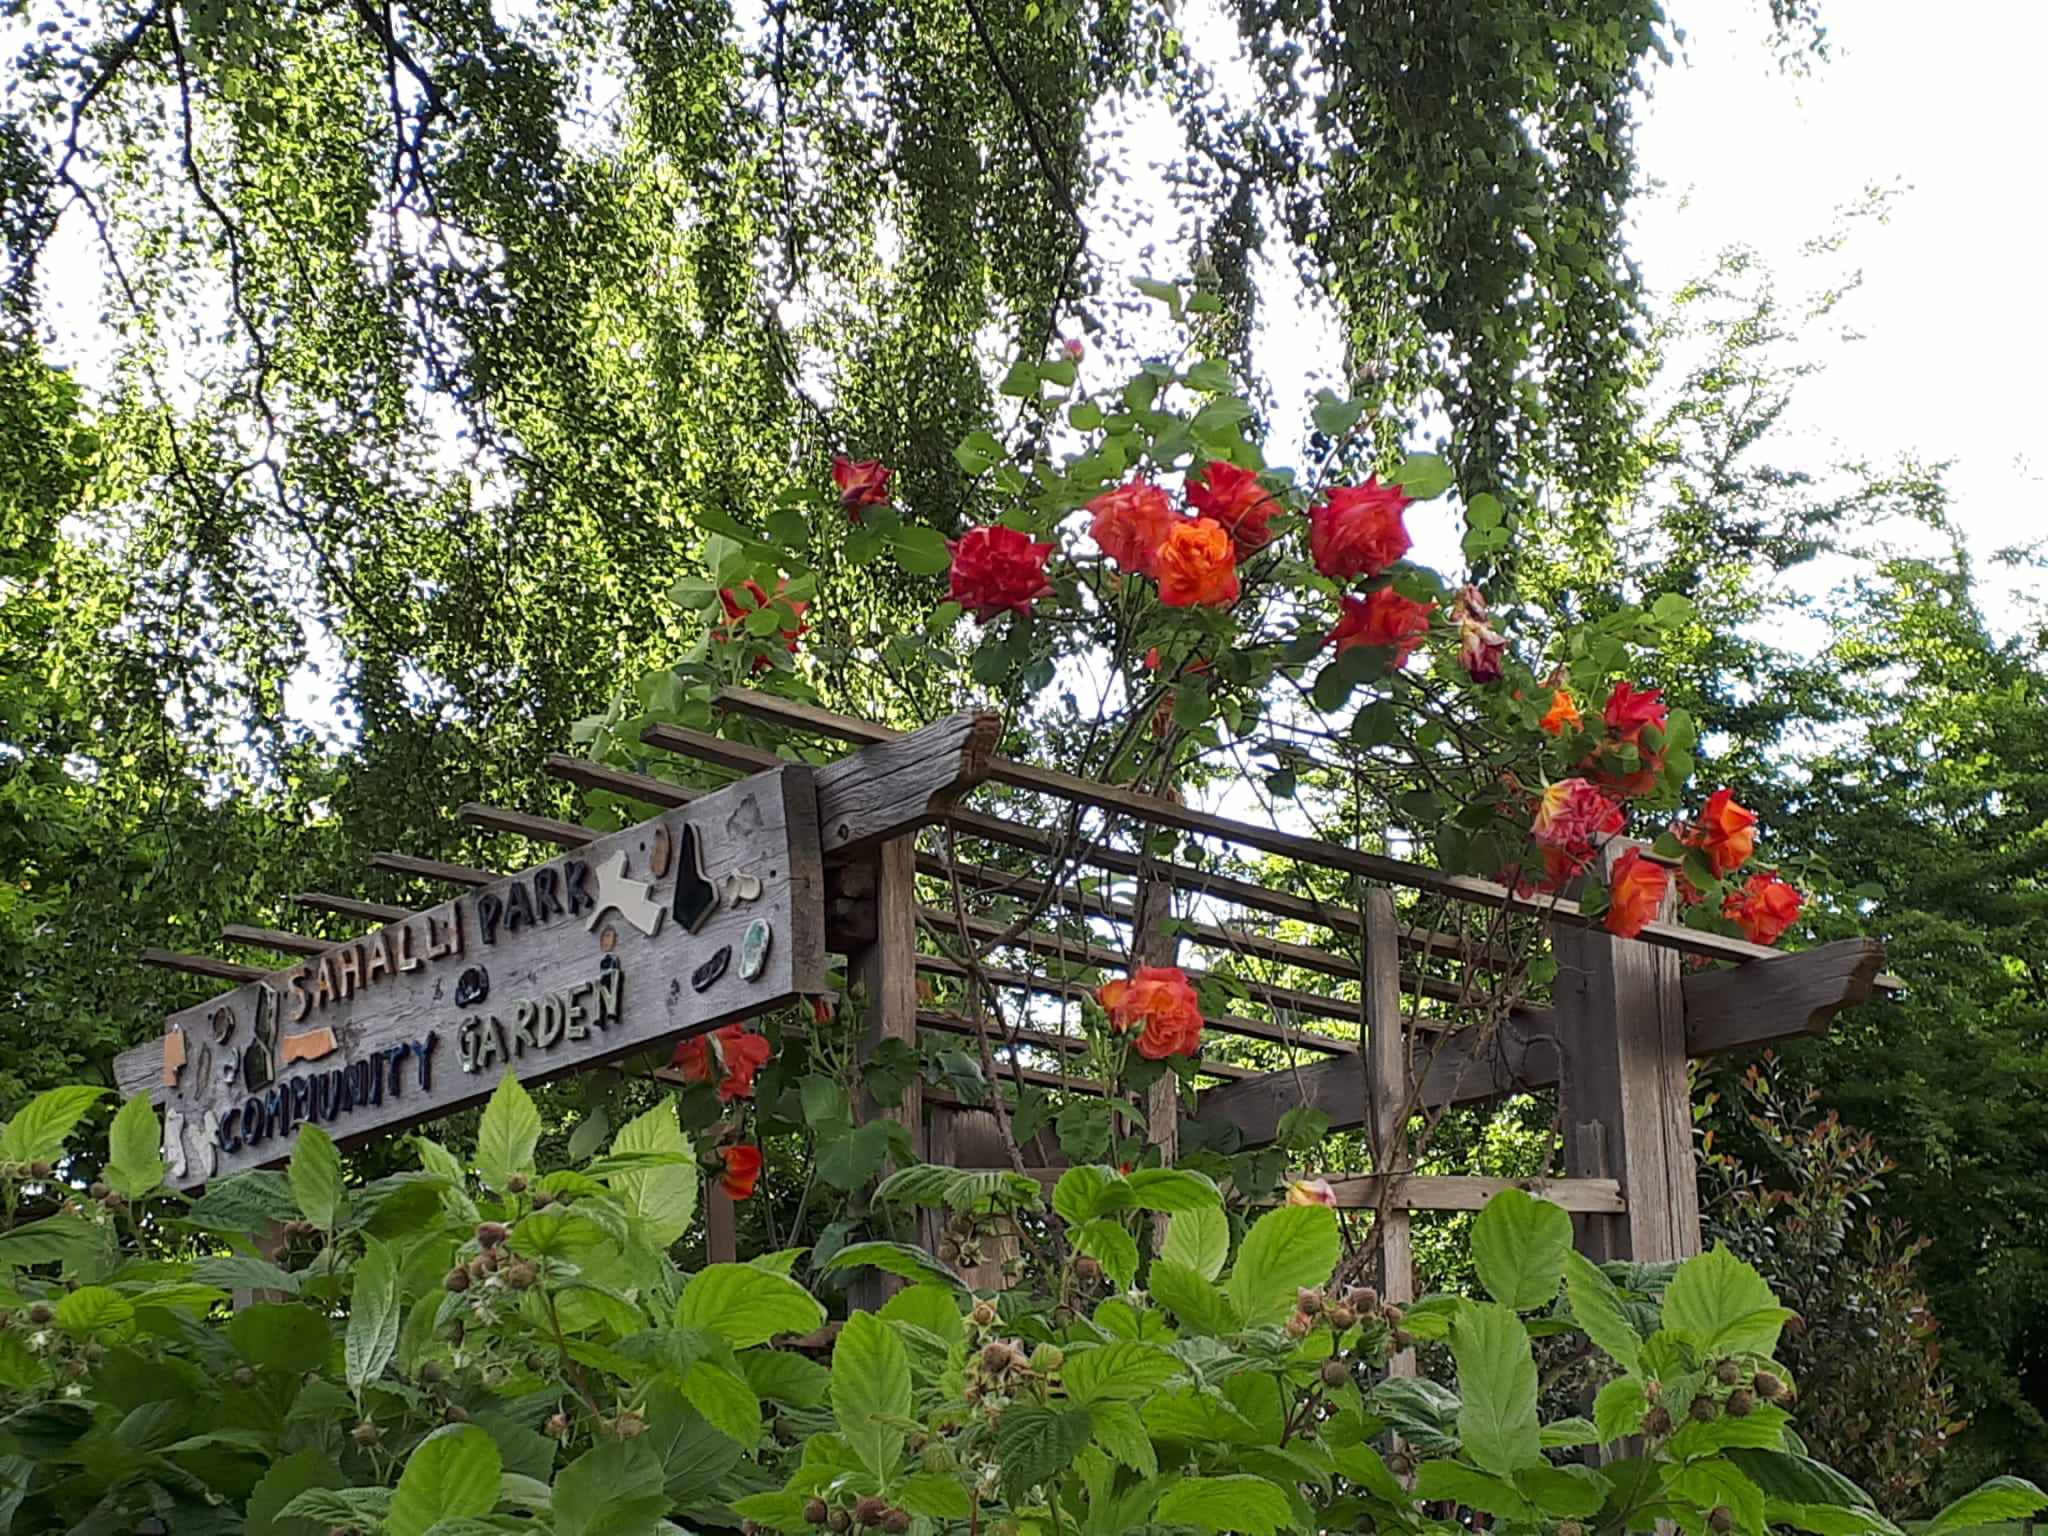 sign made of ceramics on top of a gate that reads “sahalli park community garden” with small blobs of glazed ceramic around the lettering. there is a trailing rose growing next to the sign, with a dozen palm size blooms.  under the sign on its right are raspberry bushes.